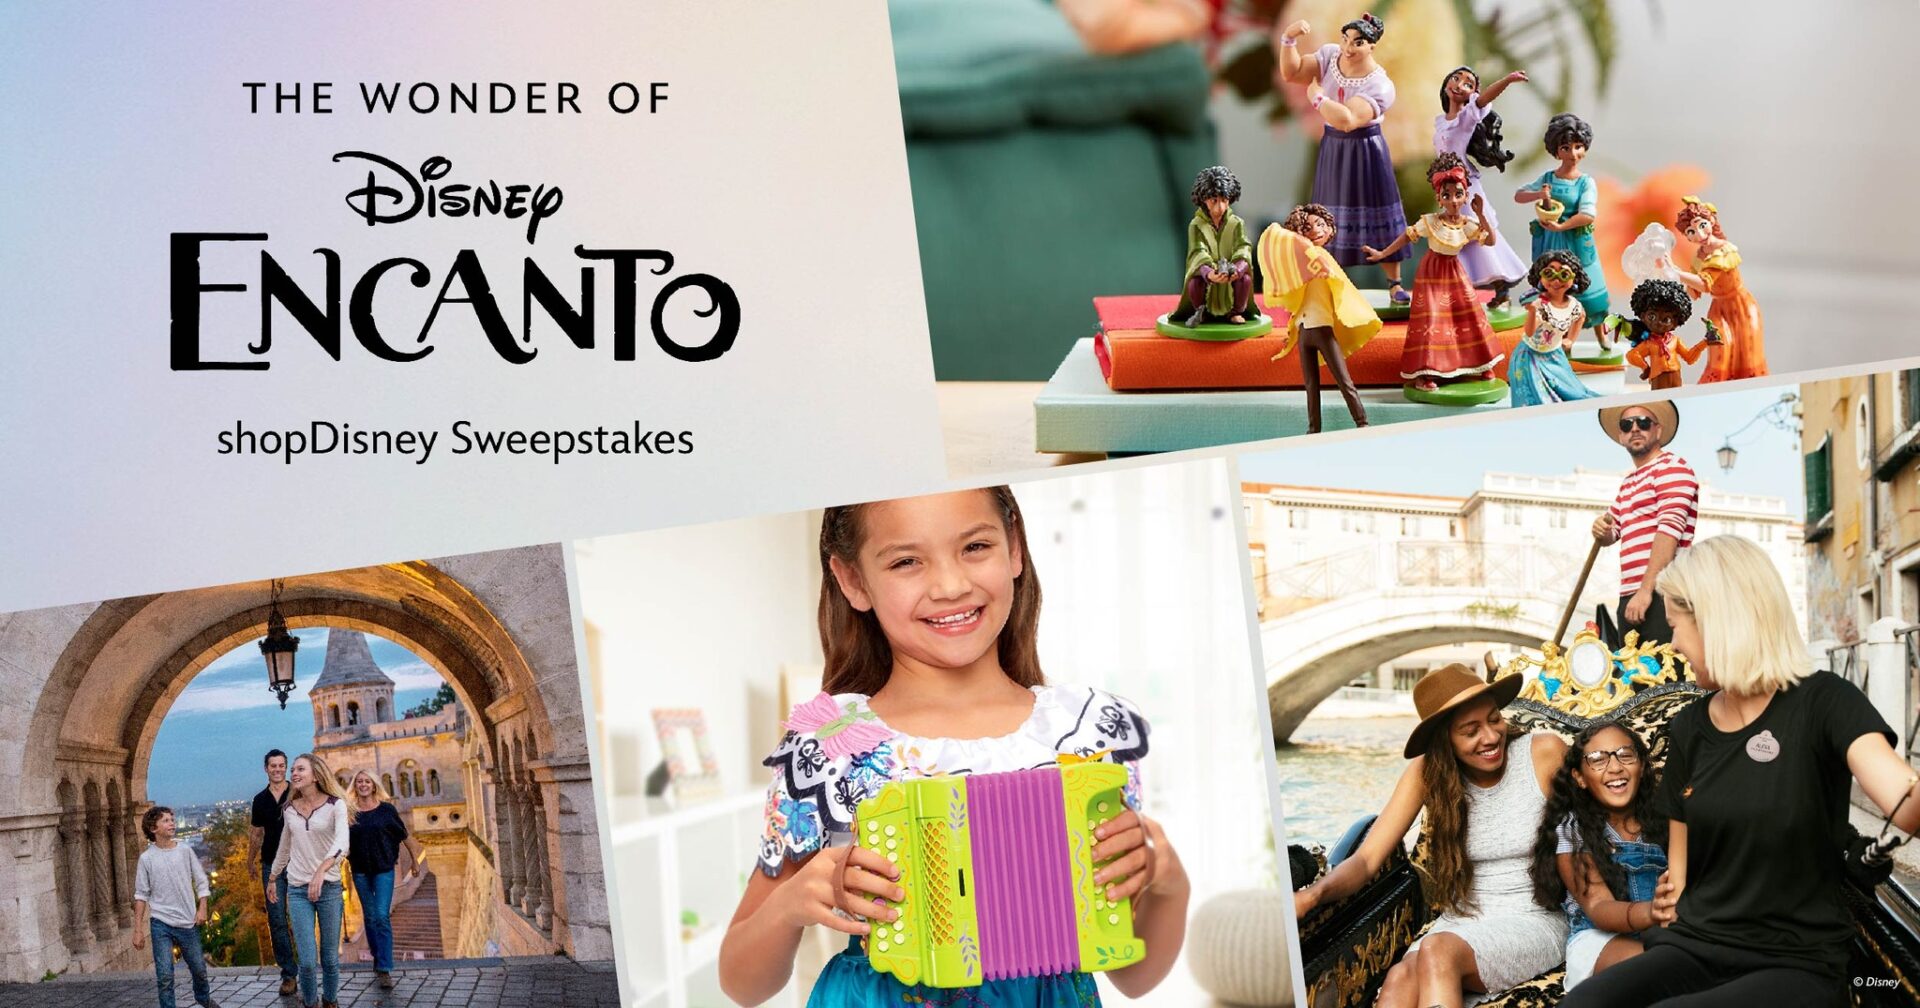 Win an Adventures by Disney Vacation from ShopDisney